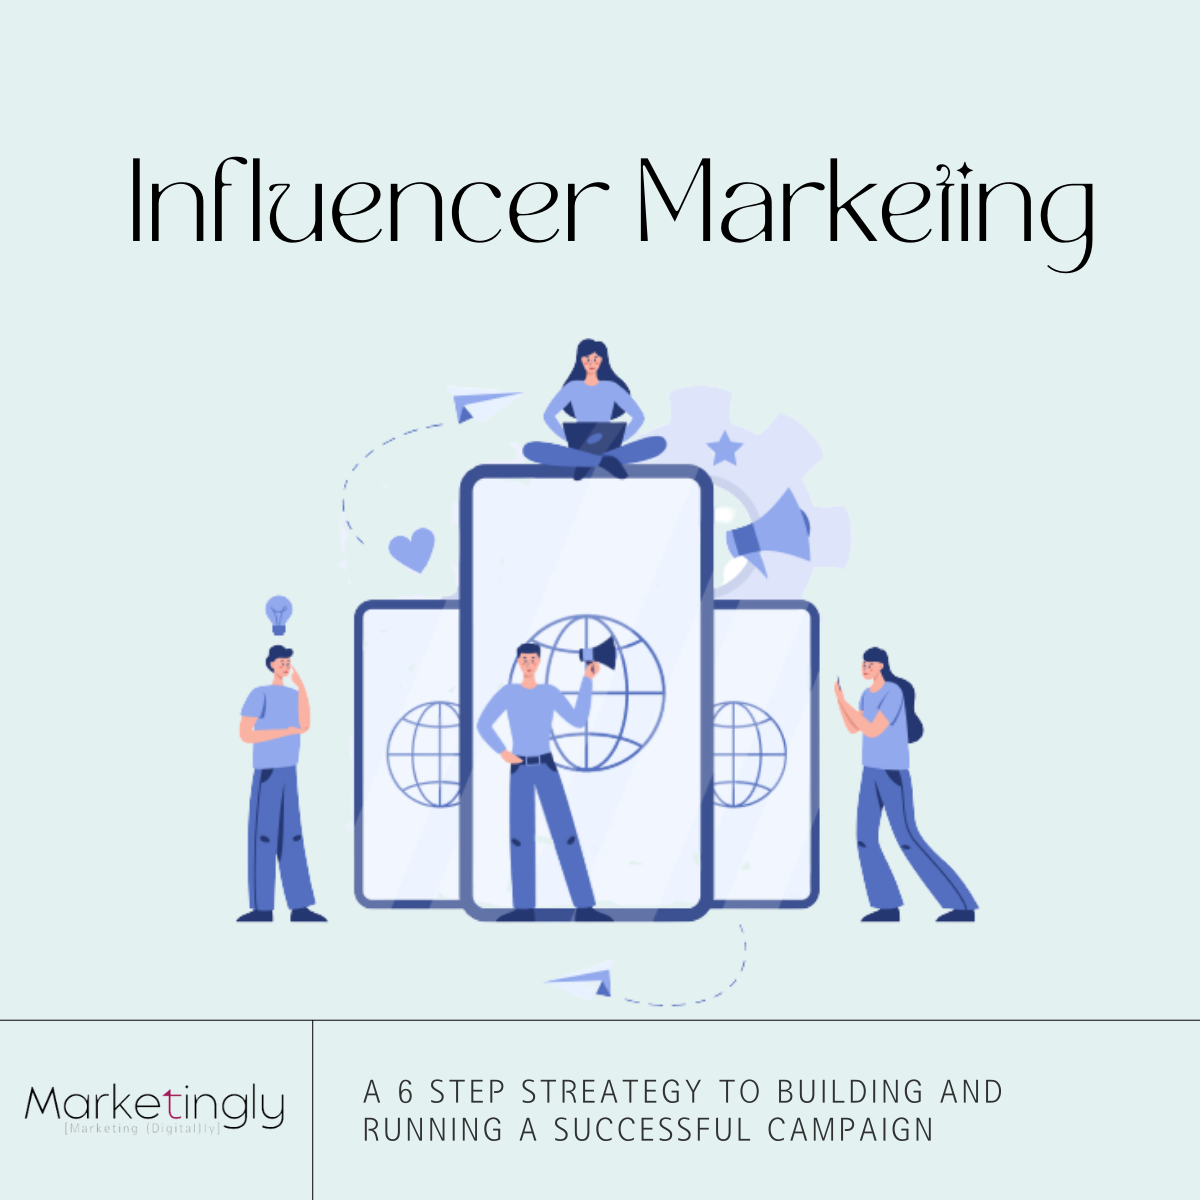 Build a Successful Influencer Marketing Campaign With This 6 Step Strategy